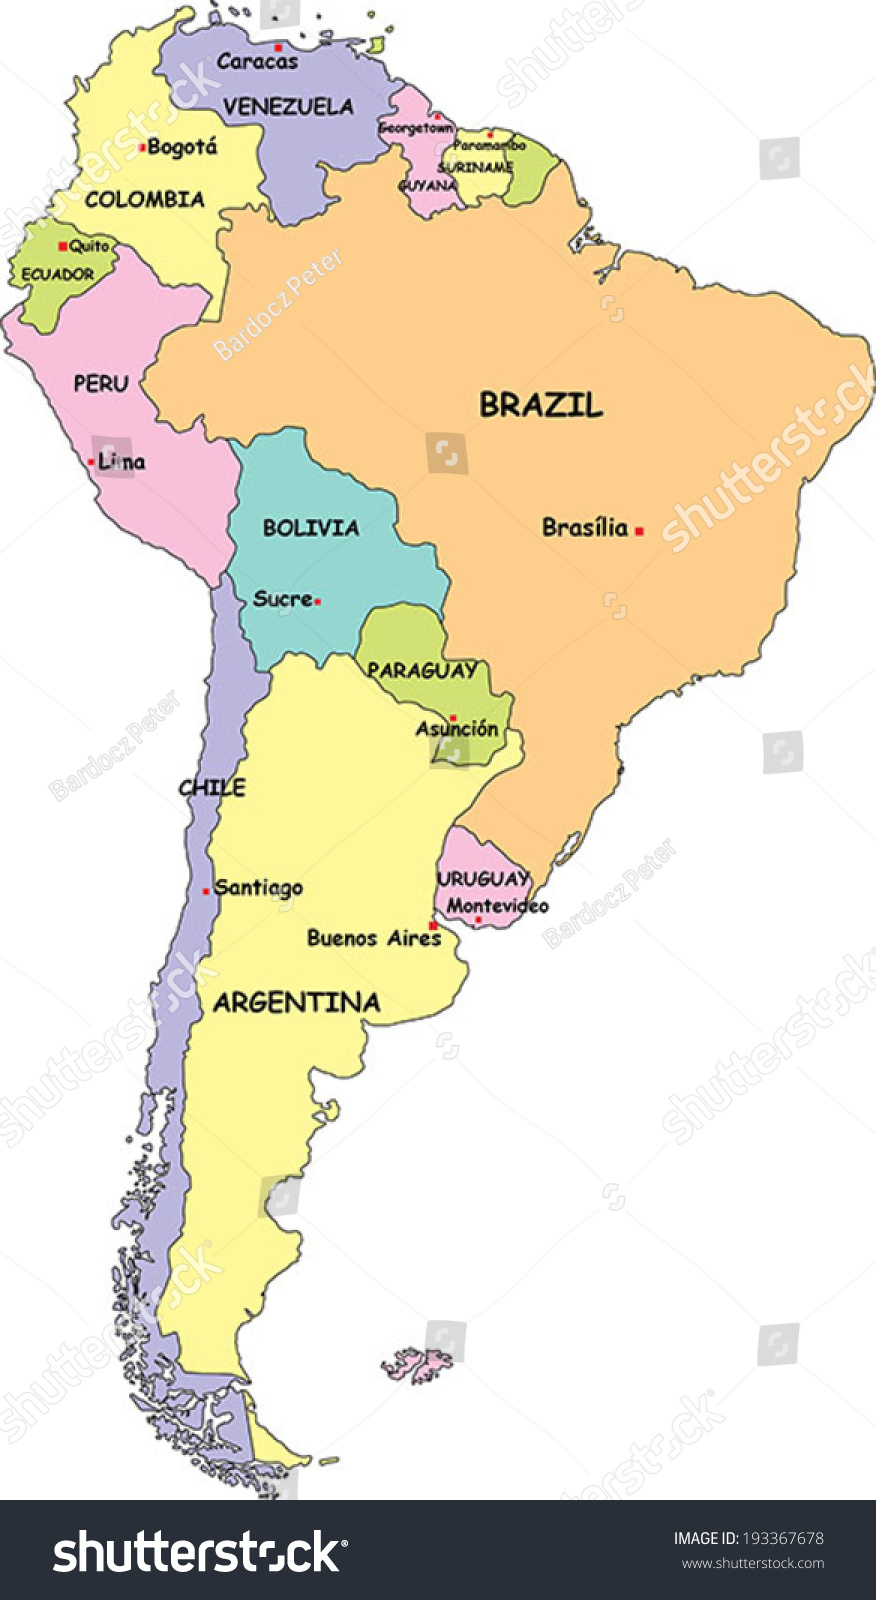 Detailed Political Map Of South America With Capitals And Major Cities